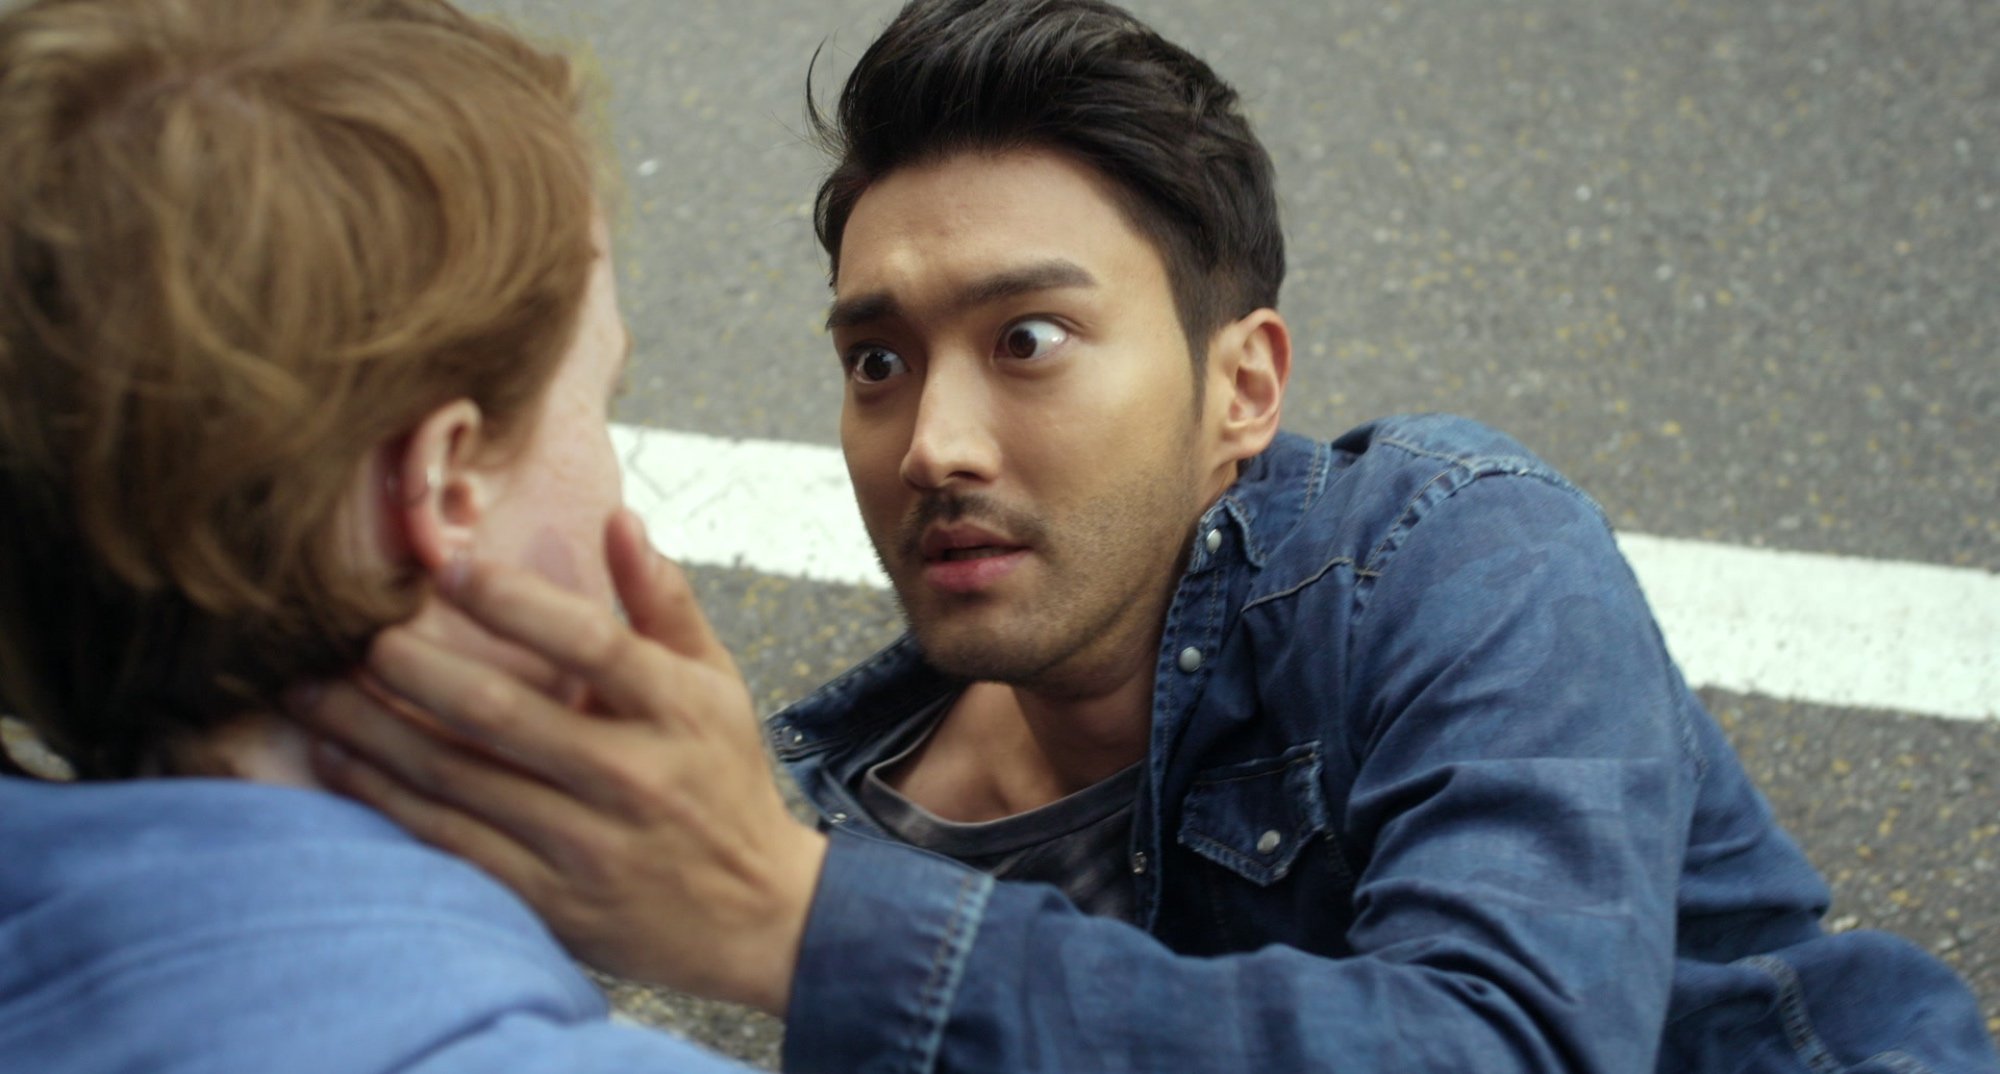 Actor Choi Siwon in 'Dramaland' cameo touching face of female lead.